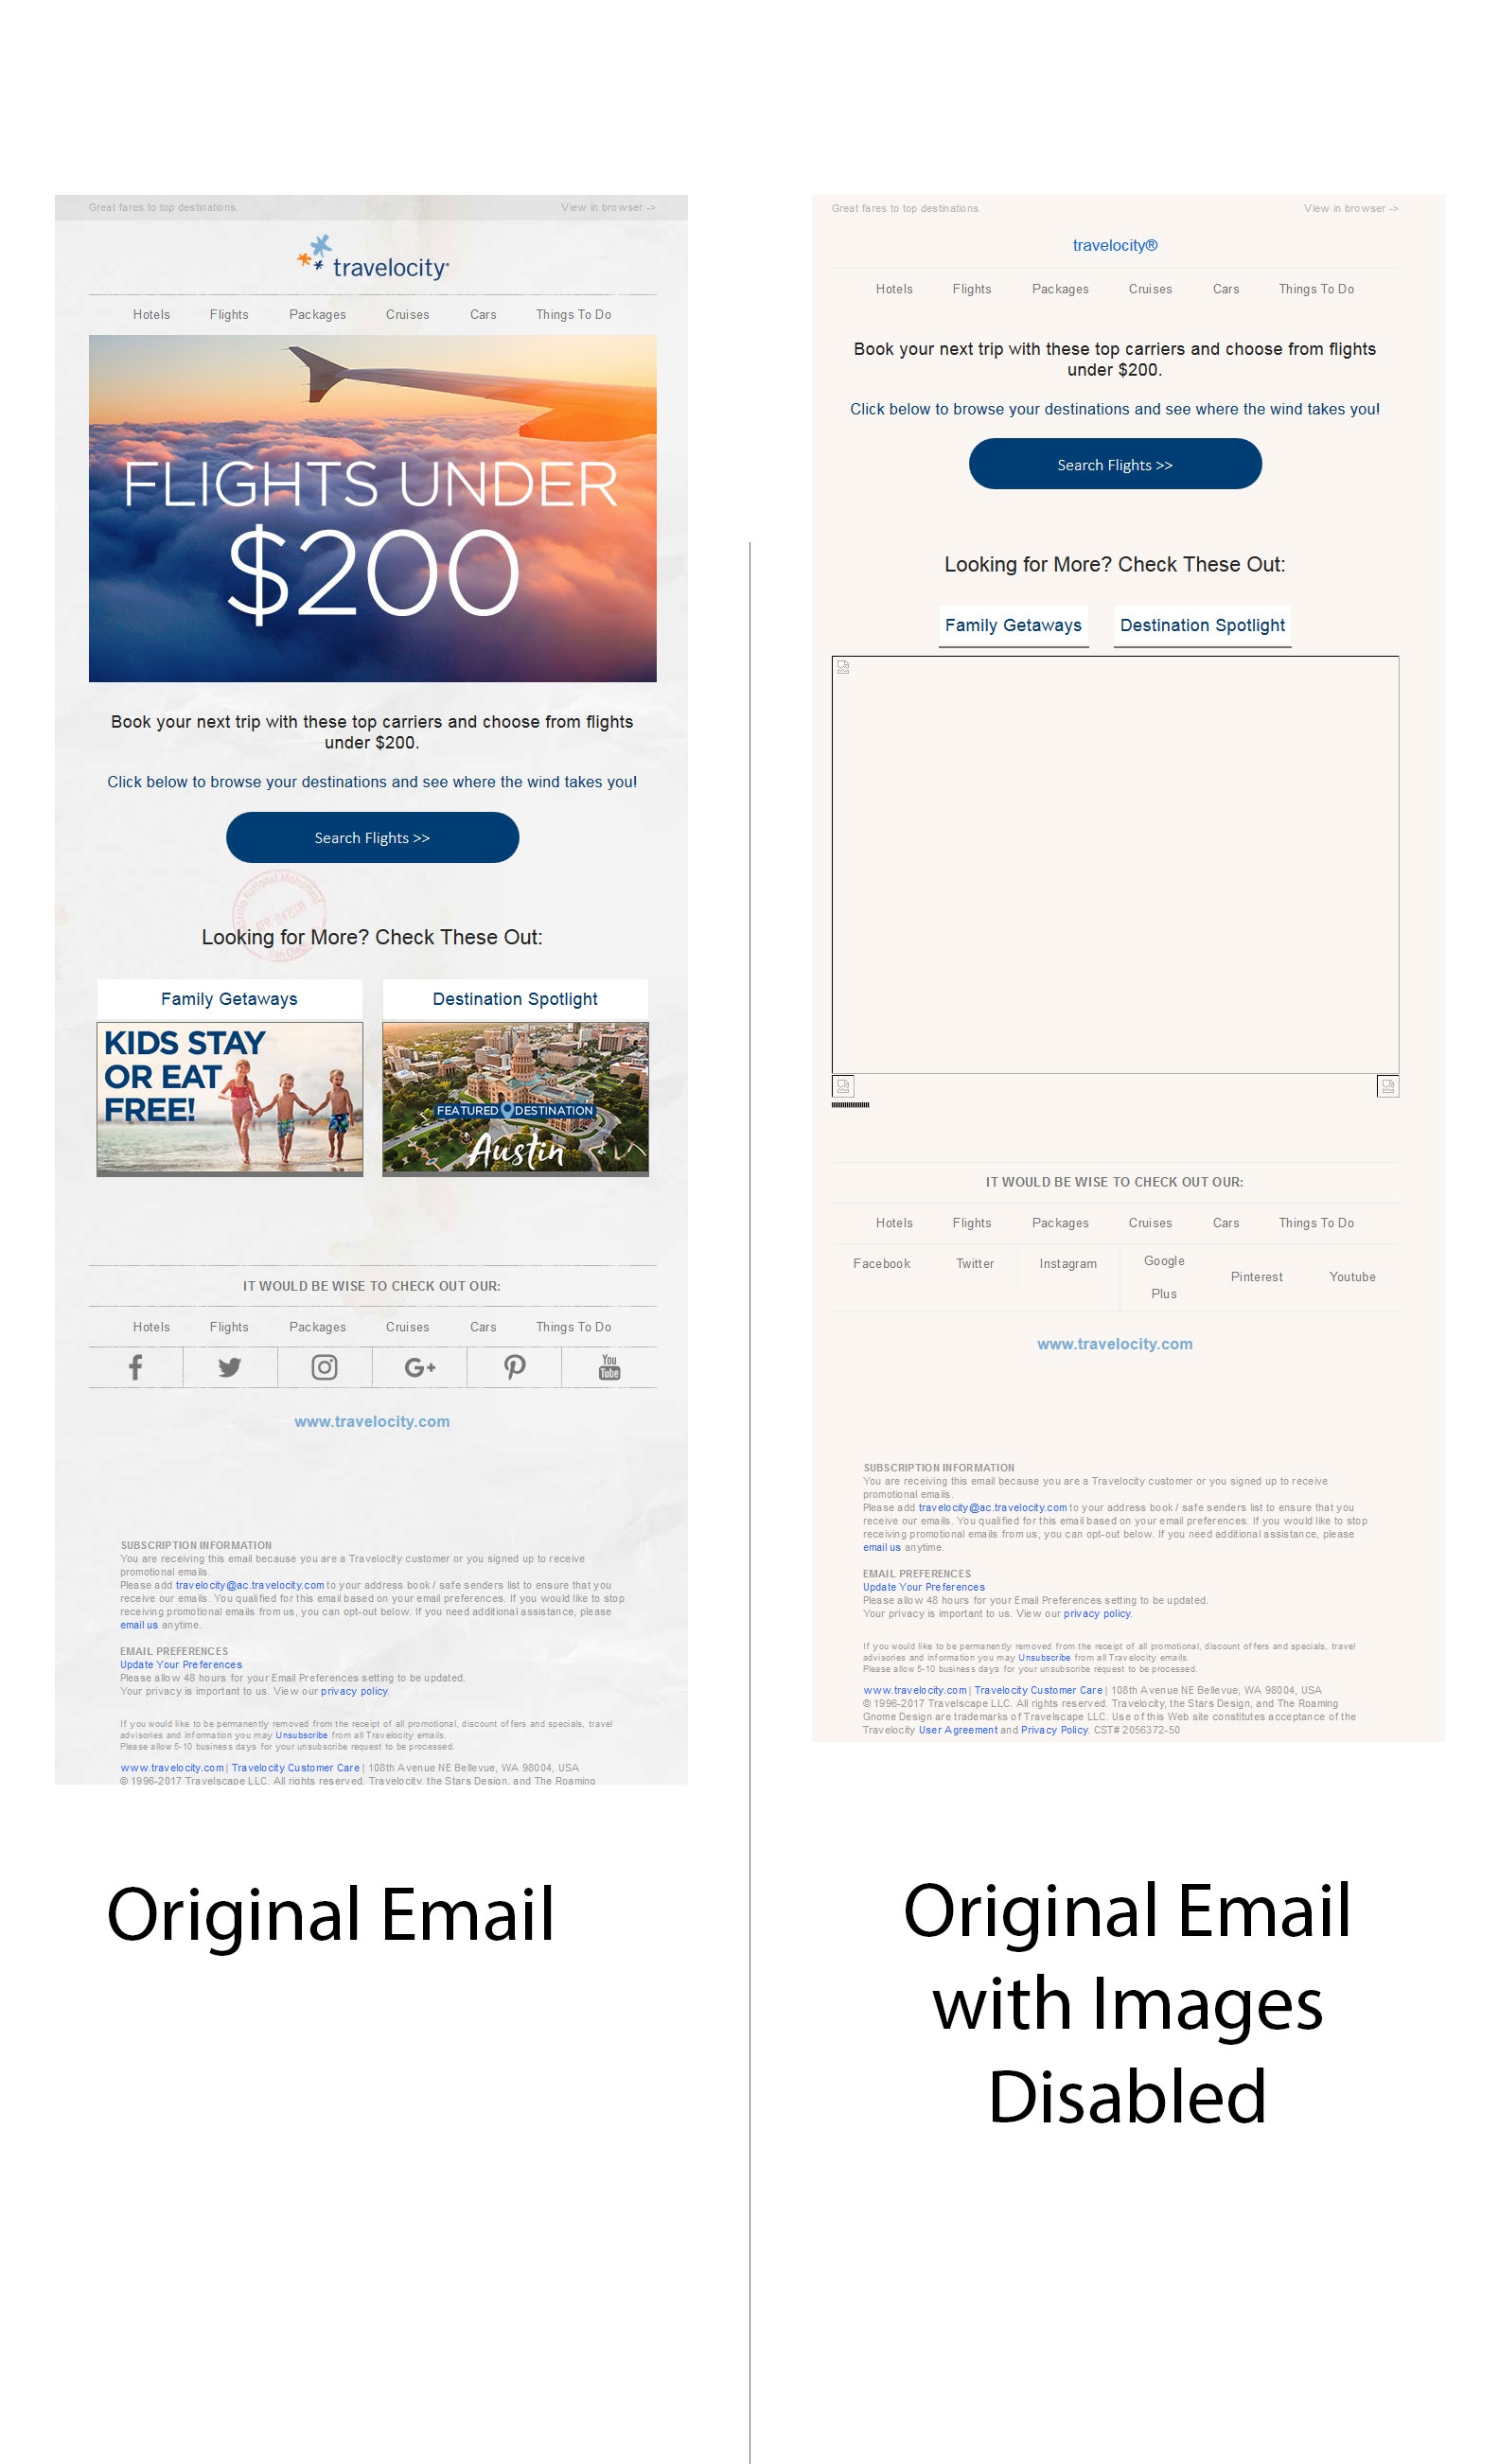 10 Dos and Don’ts of Alt-text in Emails